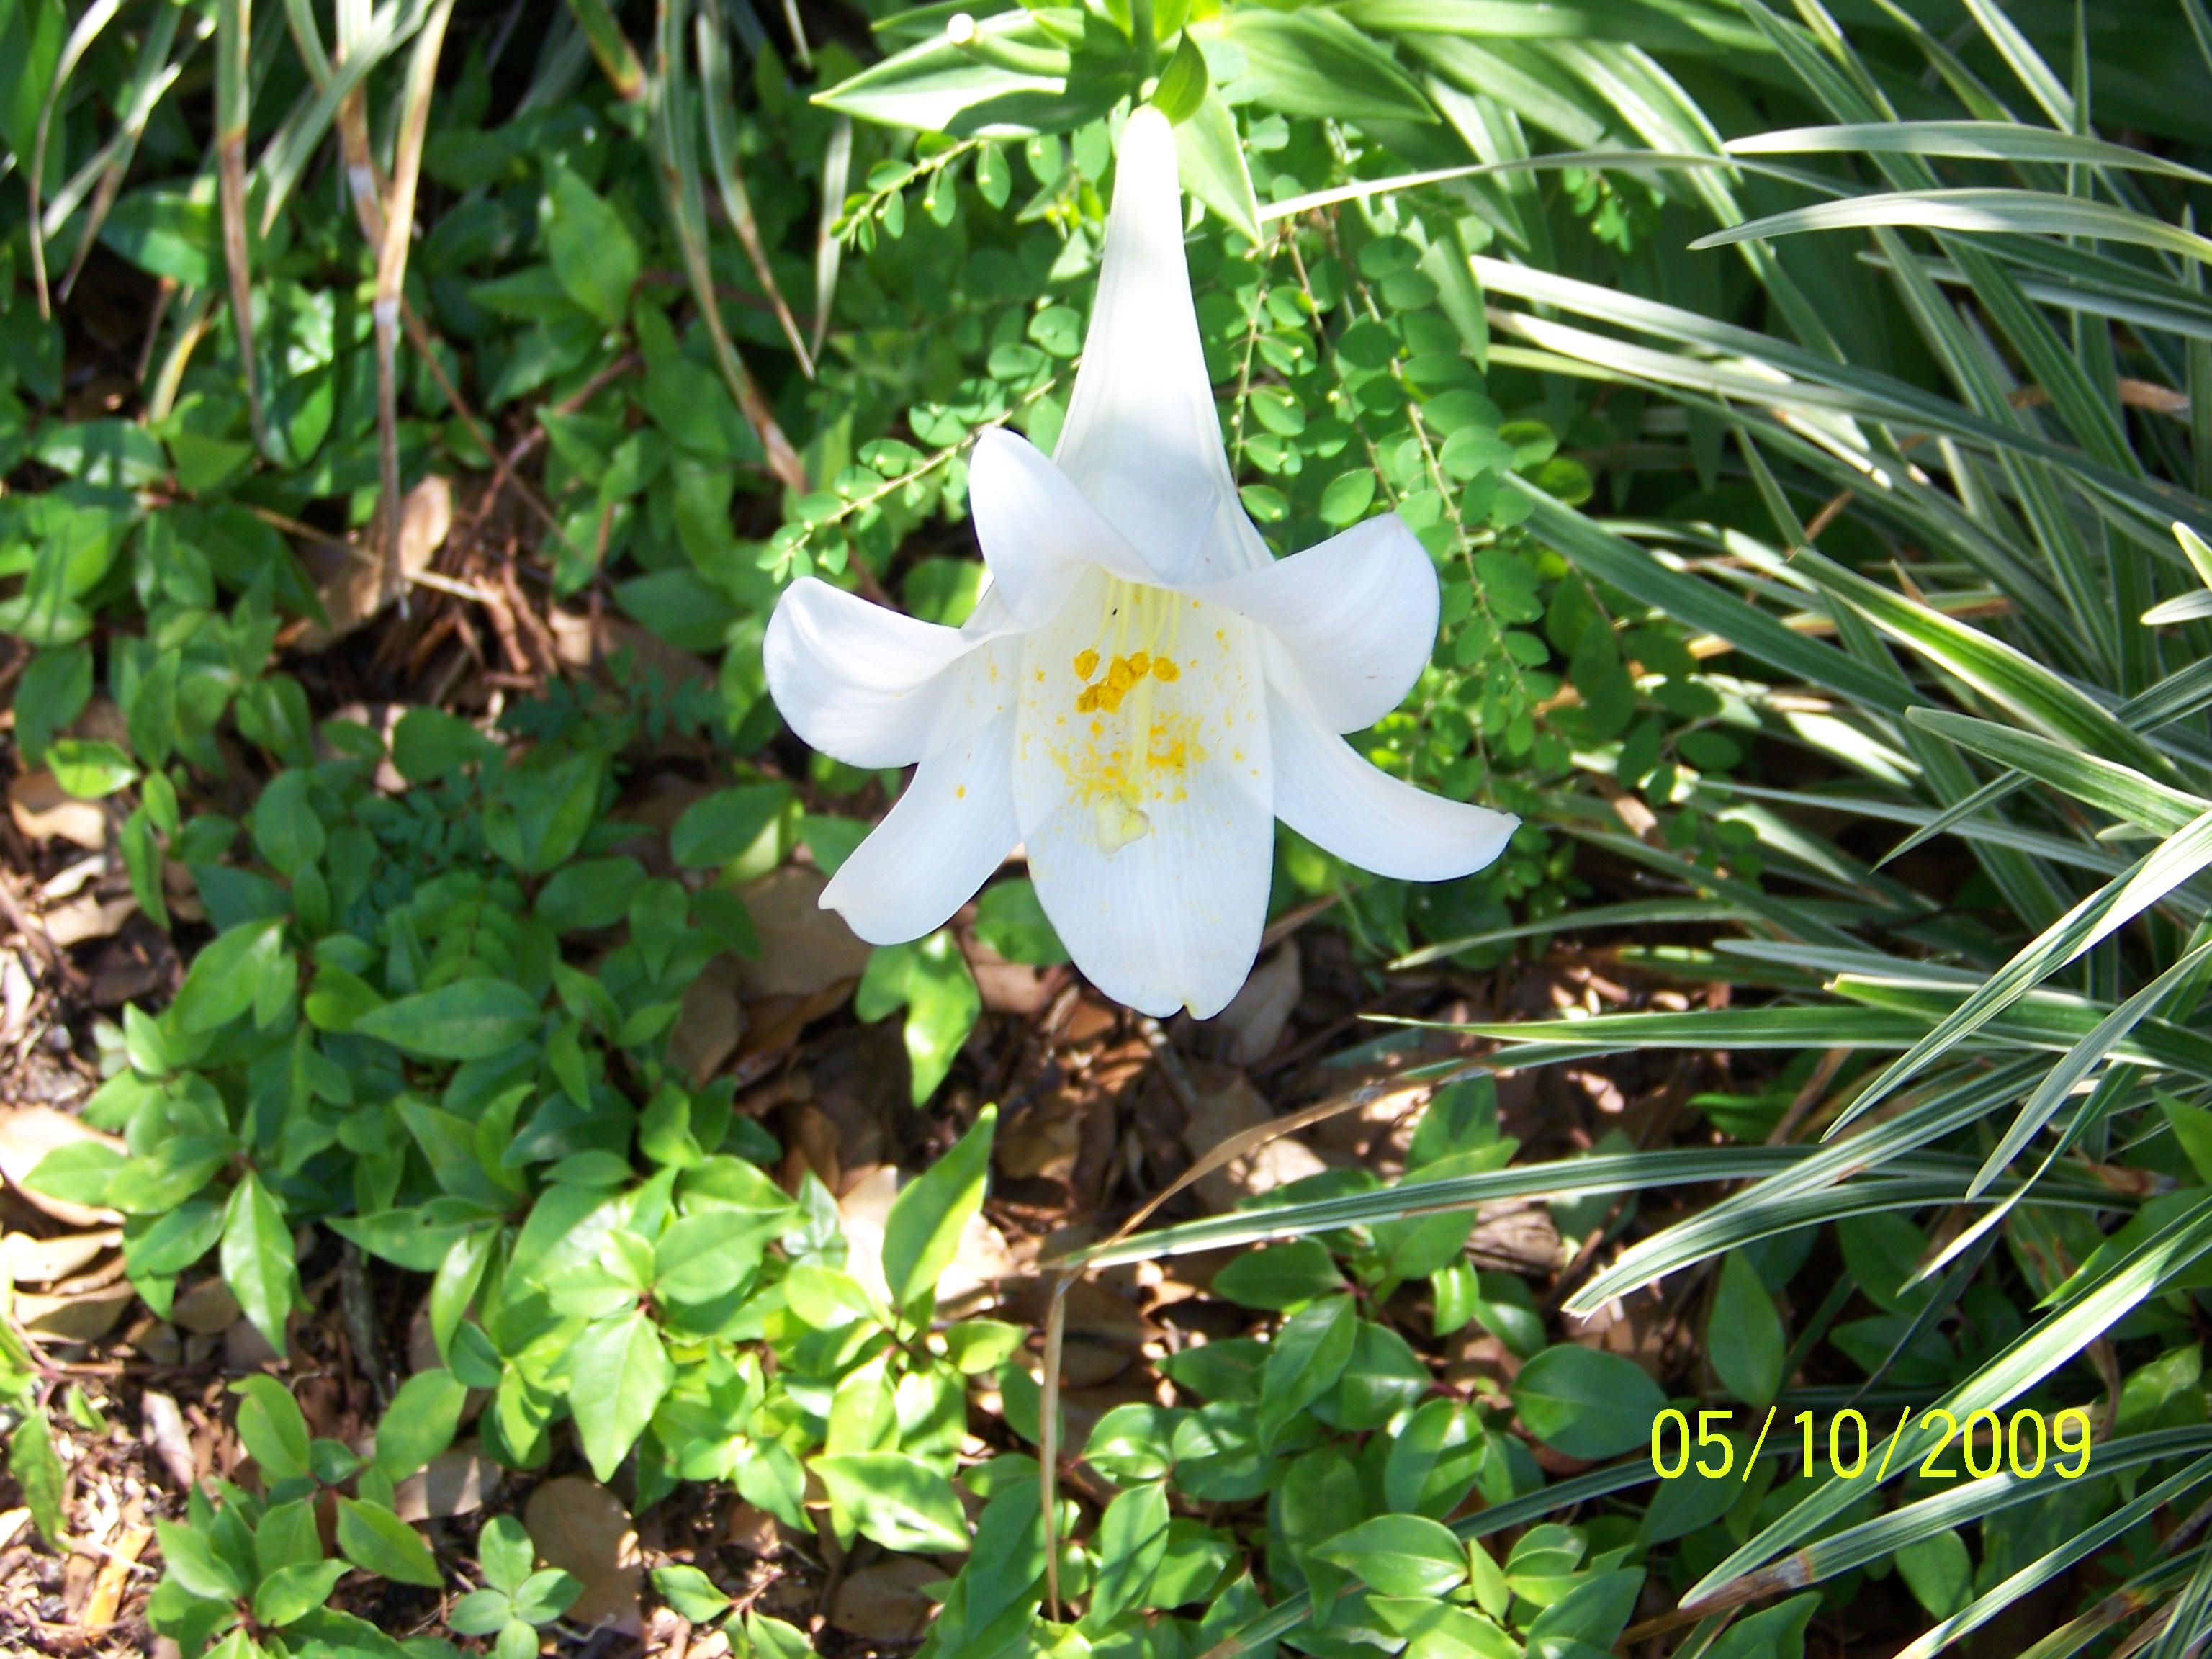 Our Easter Lily that renews each spring and reminds us Mom & Dad who are now angels above us, are always nearby.